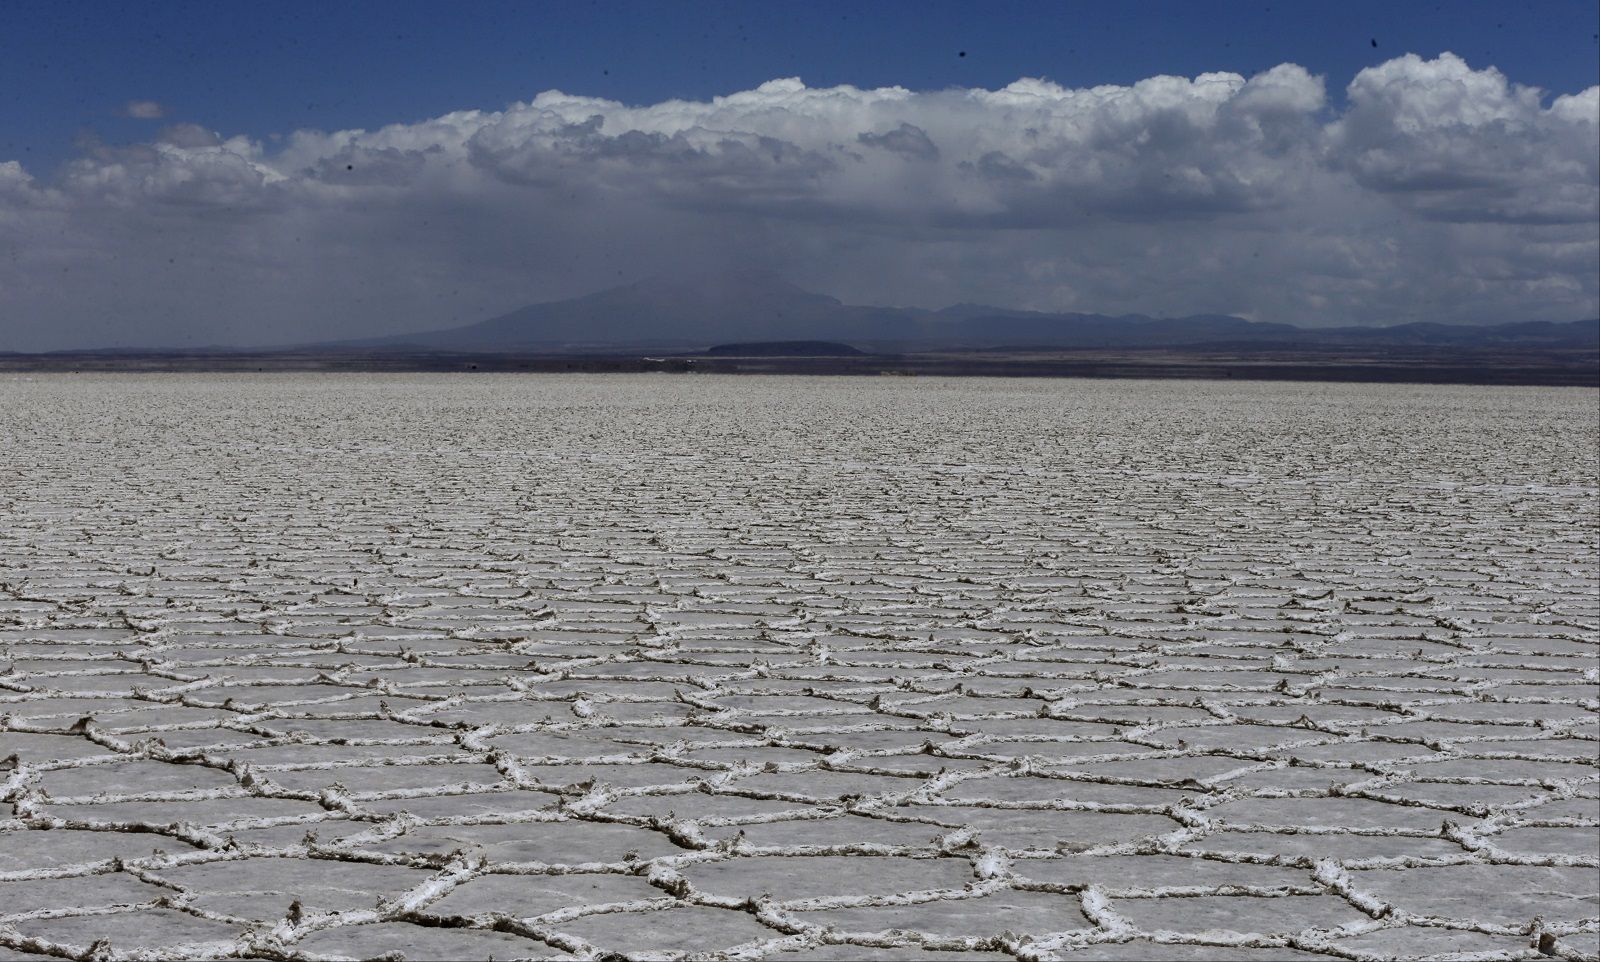 A view of the world's largest salt flats, in Uyuni, Bolivia, Friday, Jan. 8, 2016. The cloud-white flats are located in Bolivia's southwest corner, 280 miles south of La Paz, and are one of Bolivia's main tourist attractions. They span 4,085 square miles and penetrate as far as 30 feet deep. (AP Photo/Jorge Saenz)